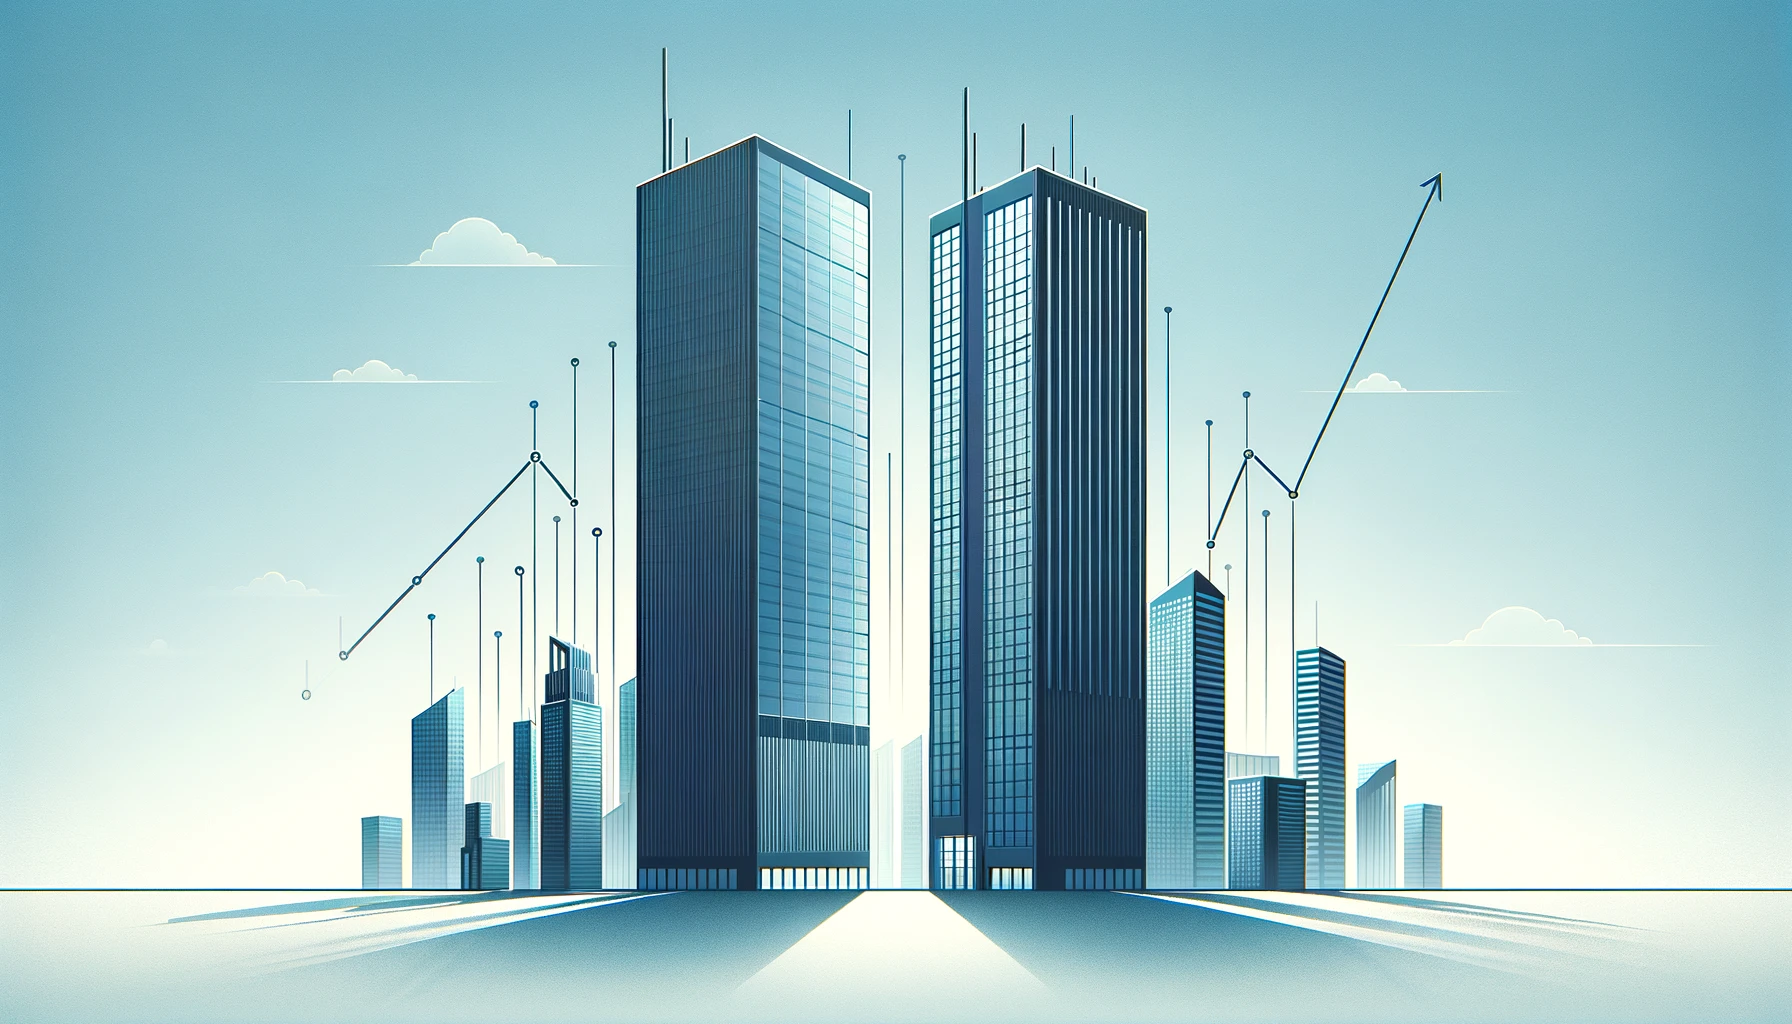 Two modern skyscrapers side by side under a blue sky, symbolizing market competition and business analysis, with a dashed growth chart between them.